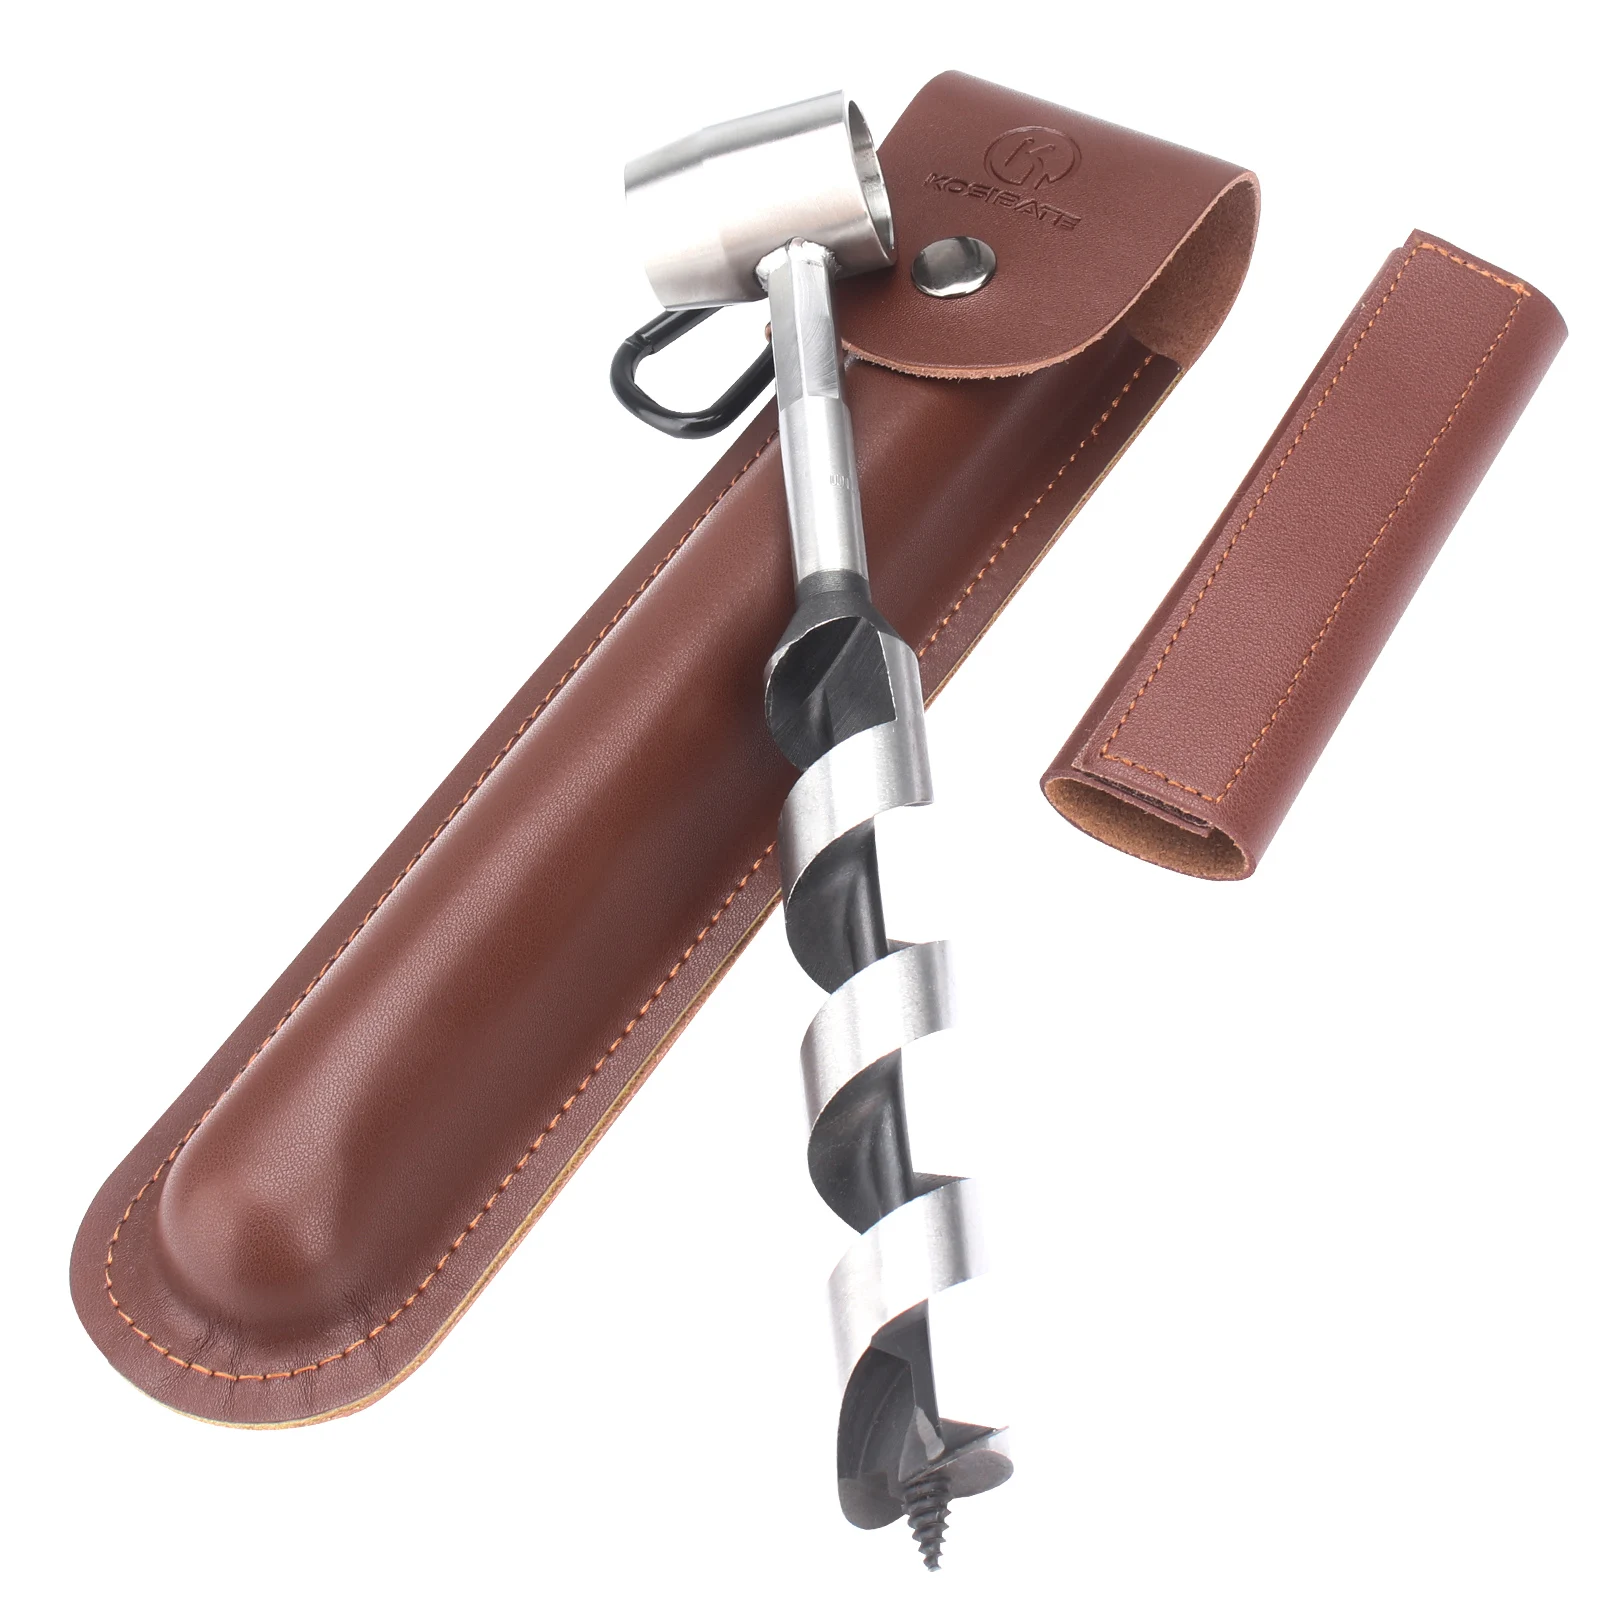 WESSLECO Multifunctional Survival Settlers Tool Bushcraft Hand Auger Wre... - $88.94